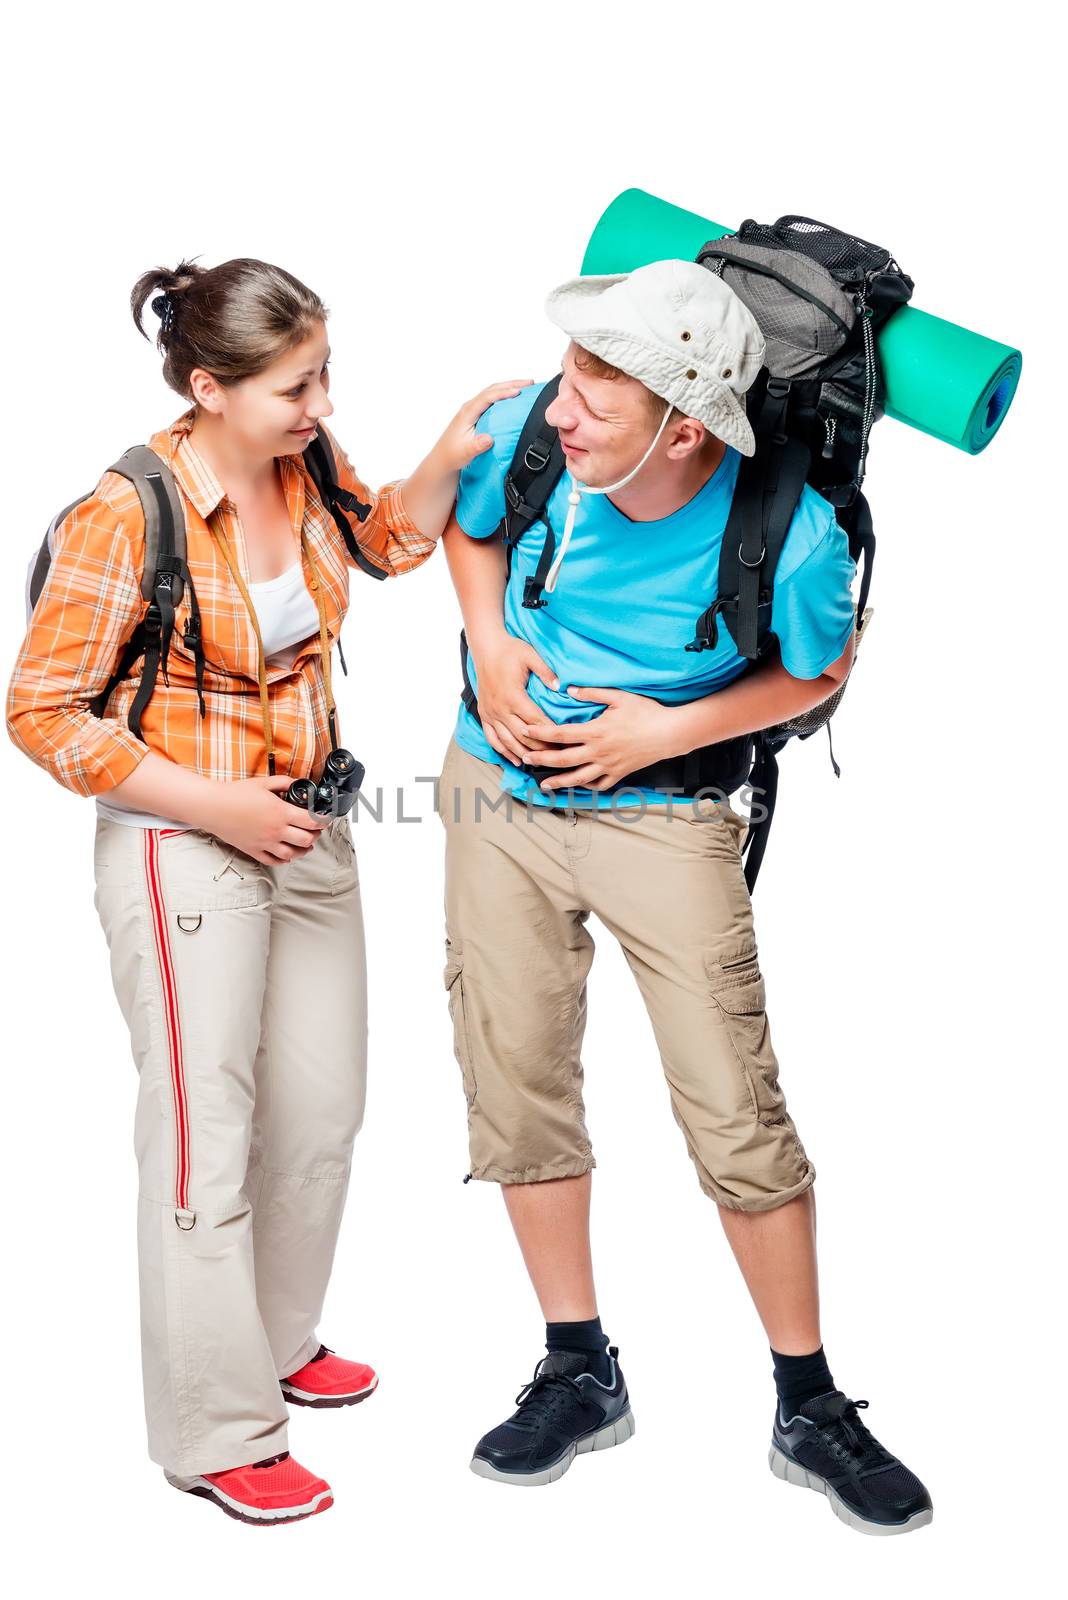 Tourist with stomach pain and diarrhea in hike, couple on white background in studio